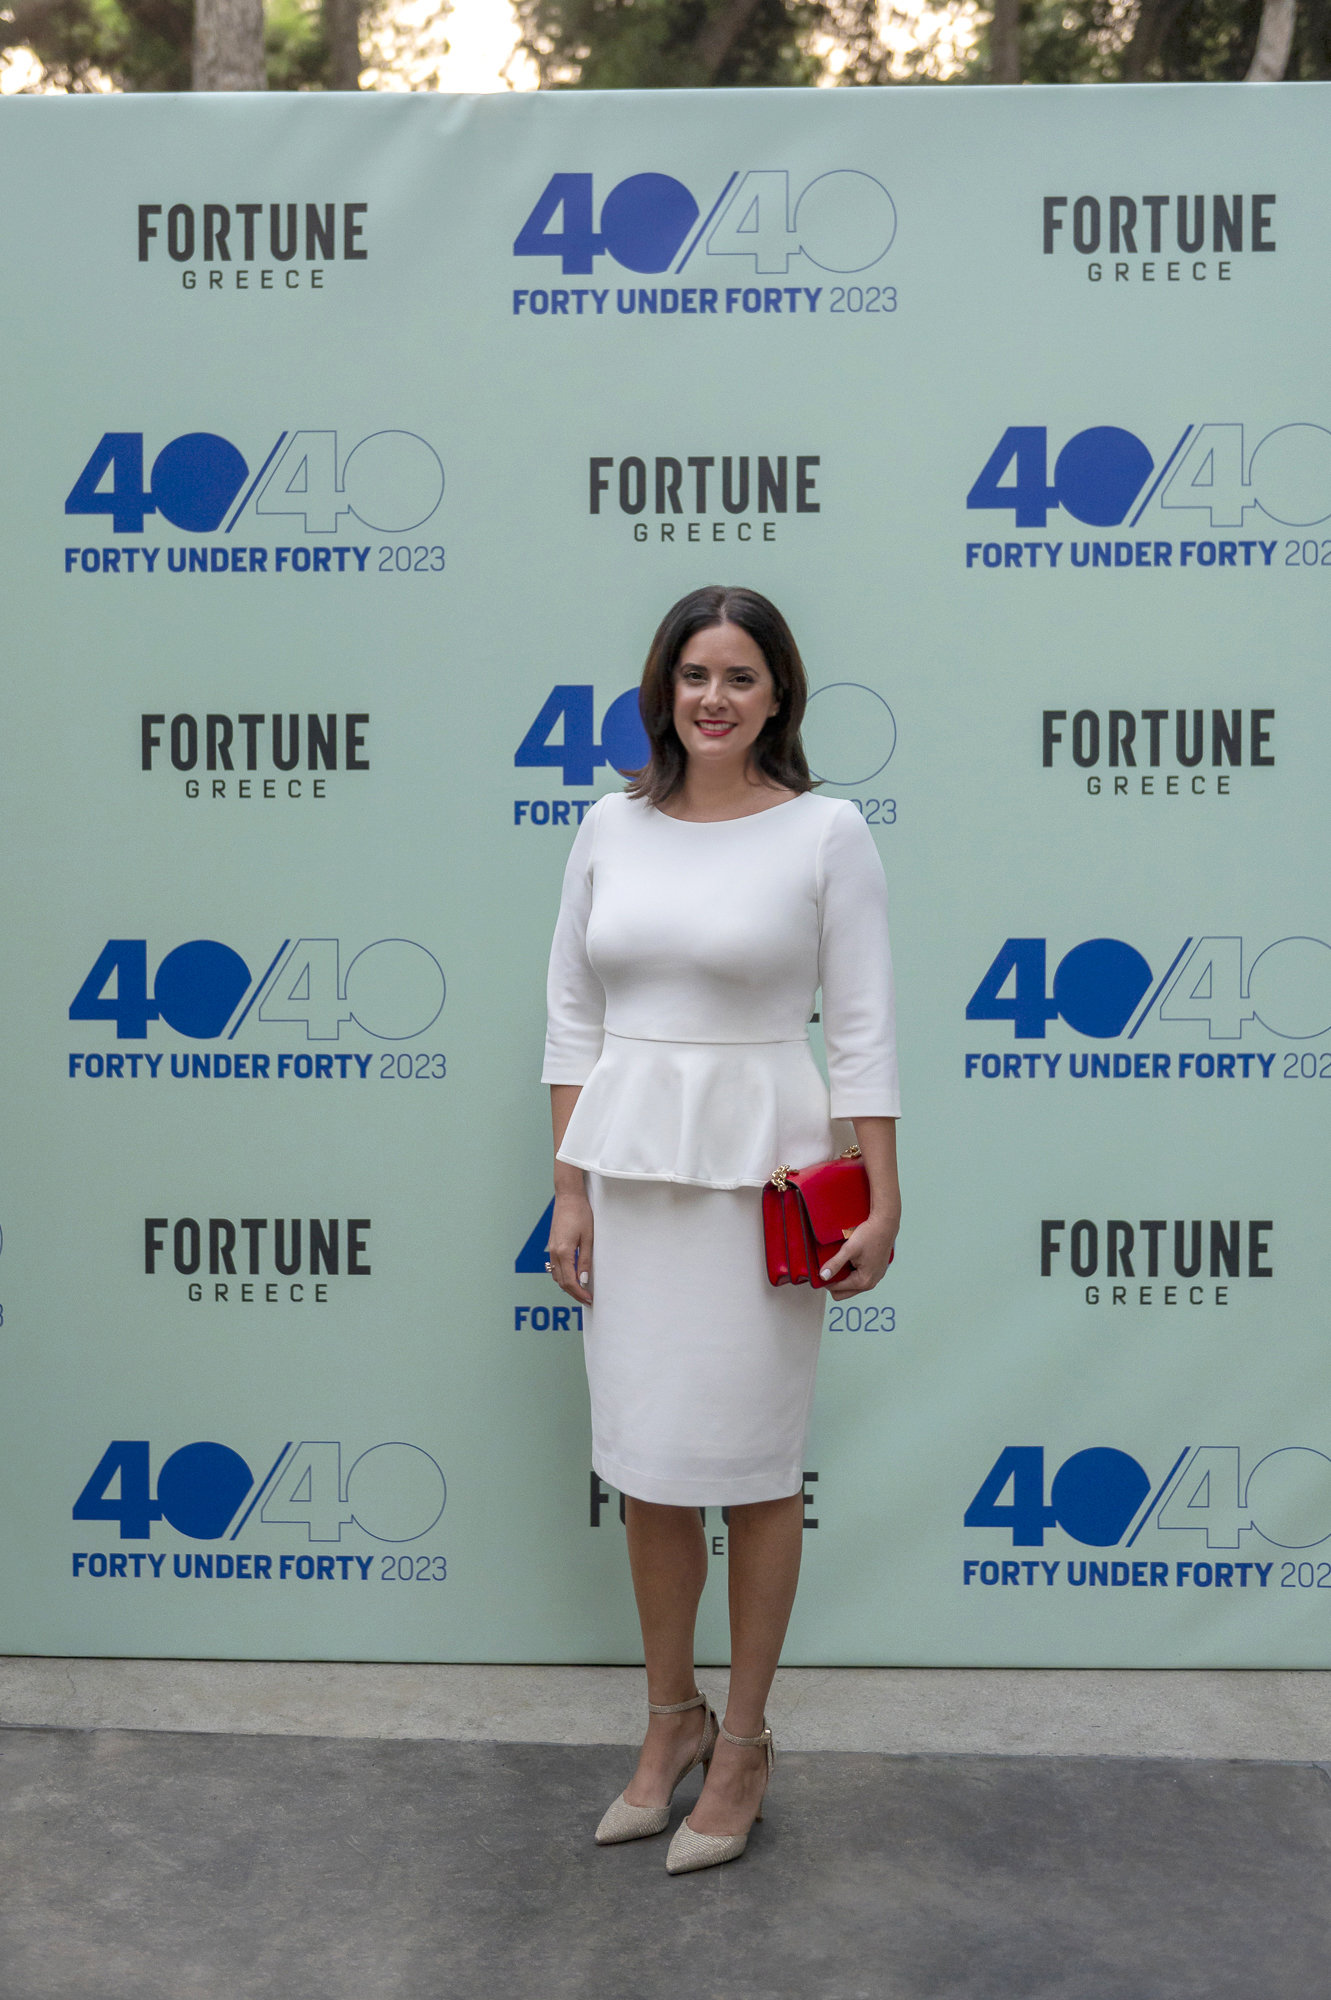 expat-nest-founder-vivian-chiona-listed-fortune-40 under 40-profile